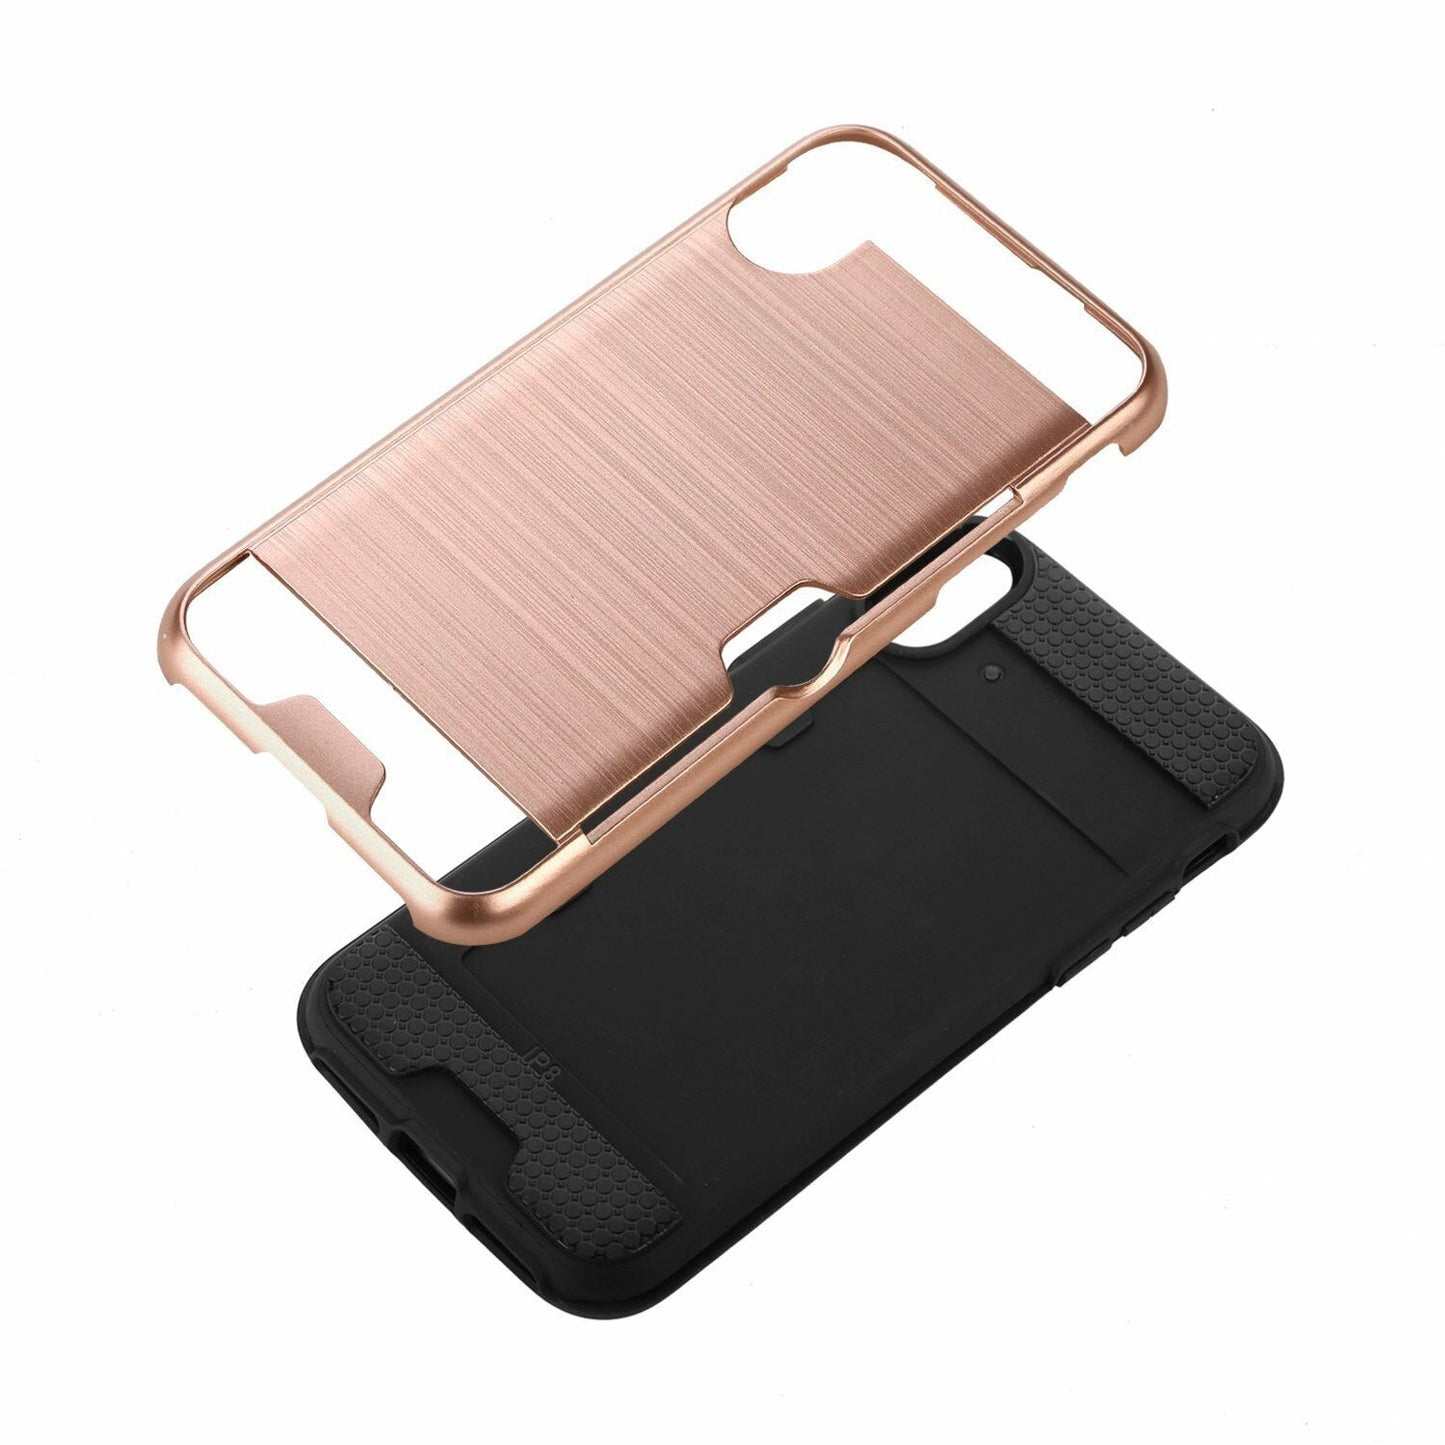 Case Fits Card Wallet Shockproof Bumper Hard Protective for iPhone - carolay.co